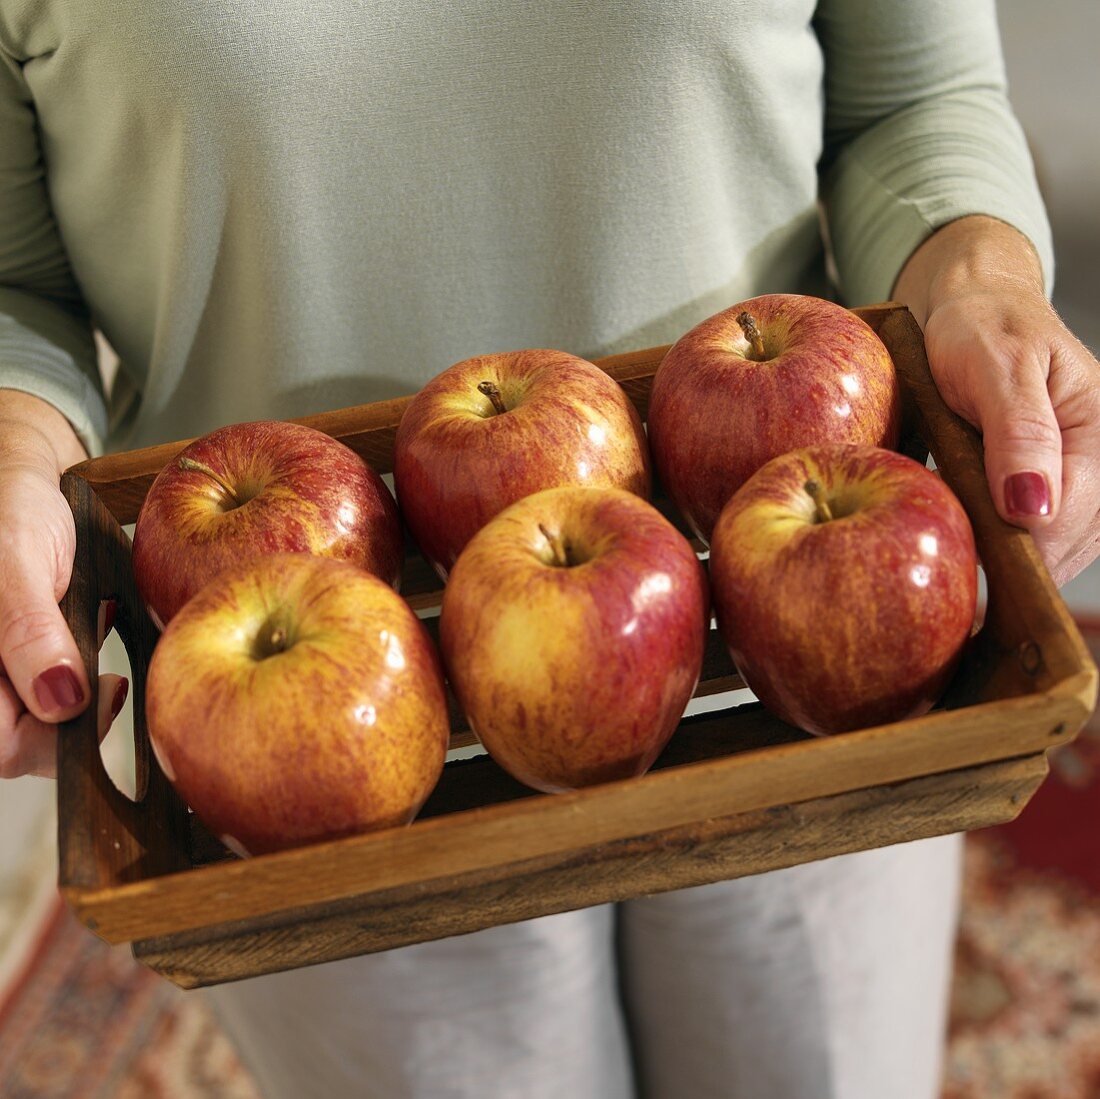 A Woman Holding a Wooden Tray with Fuji Apples